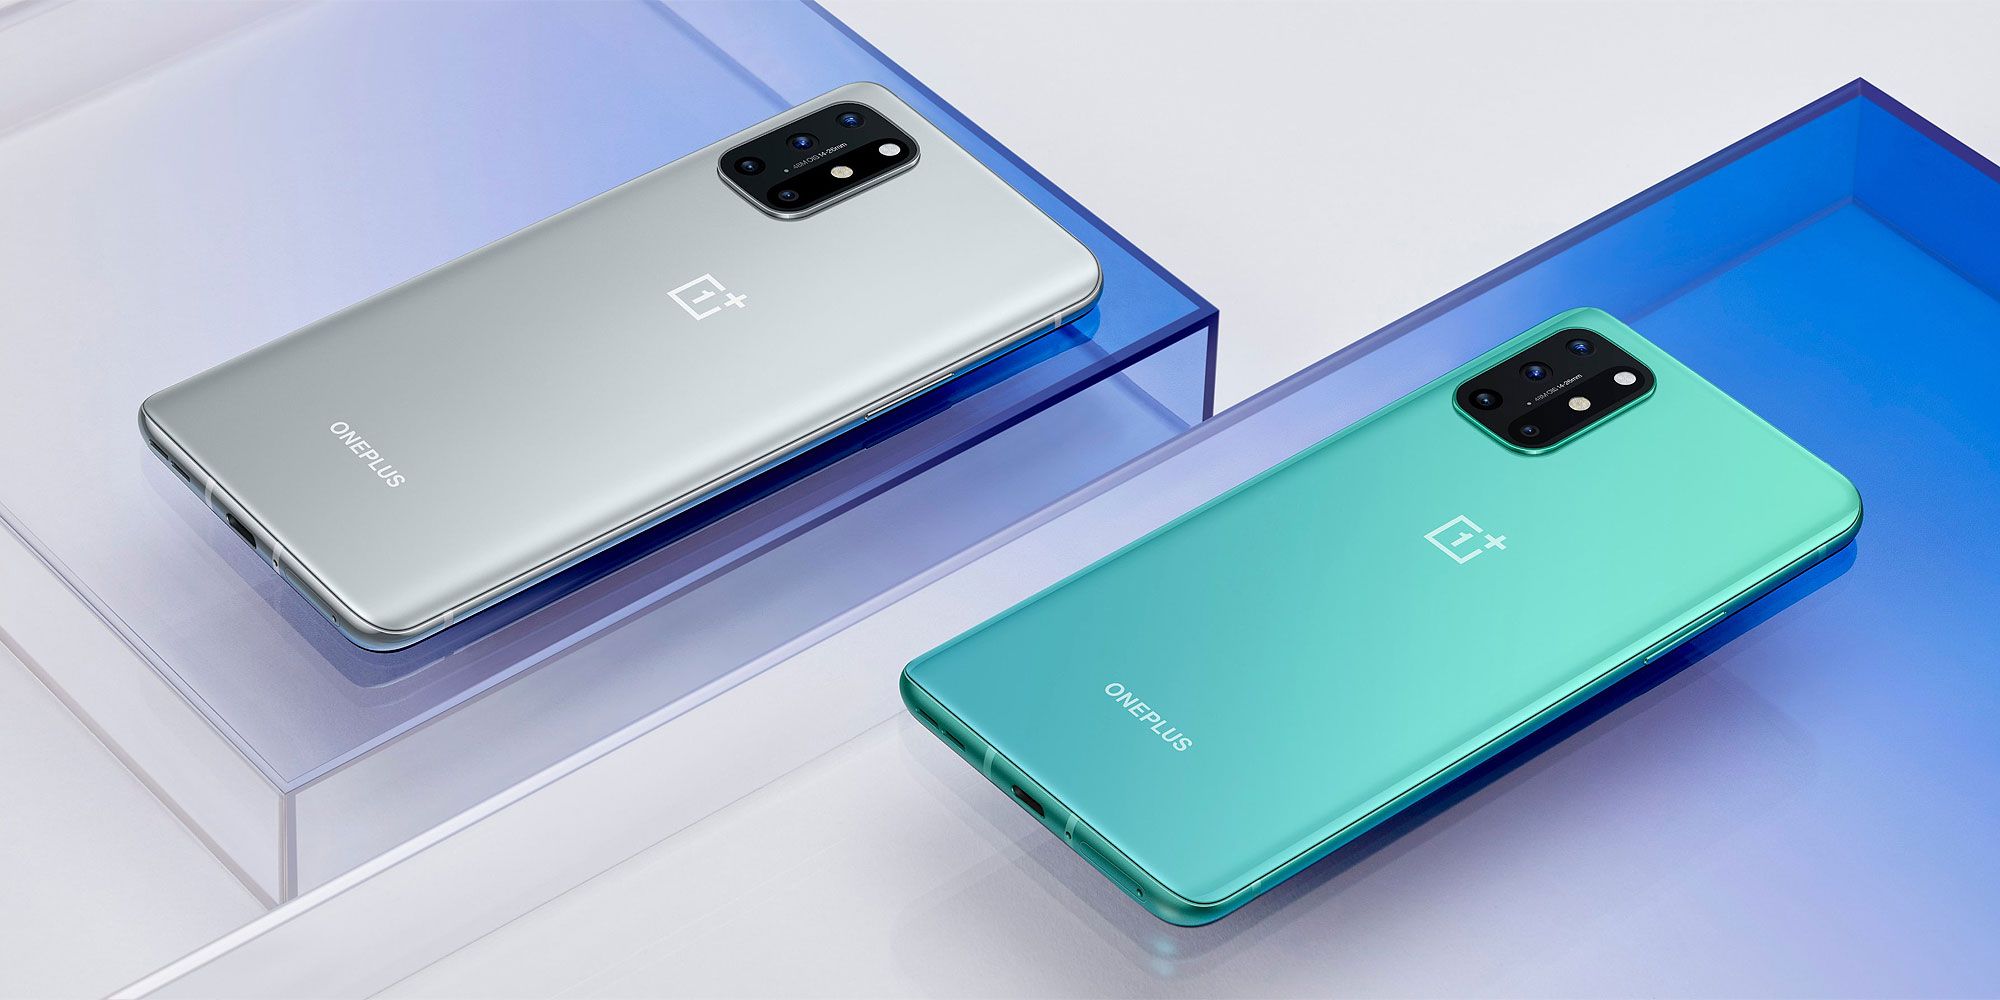 OnePlus 8T Features 5G 120Hz Display 65W Fast Charging & Costs $749